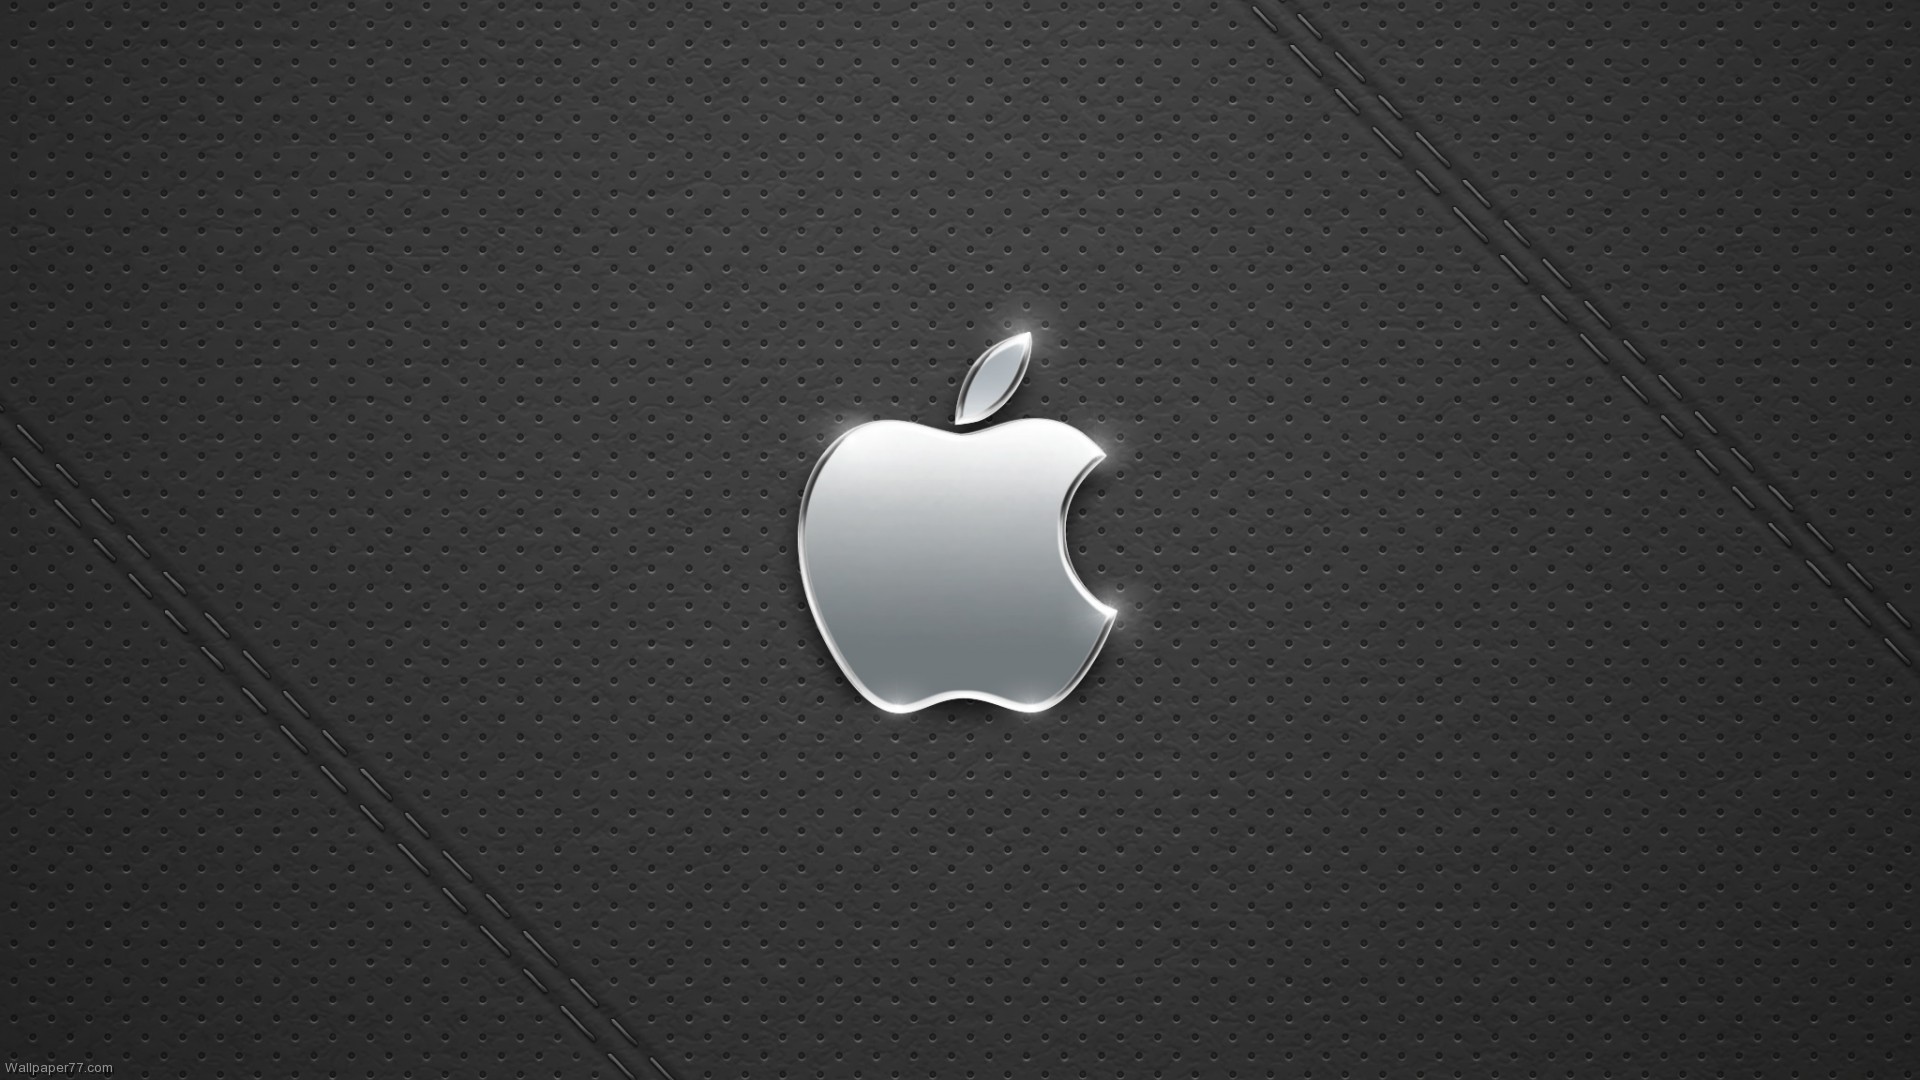 Free download wallpaper wallpapers apple logo leather computer mac